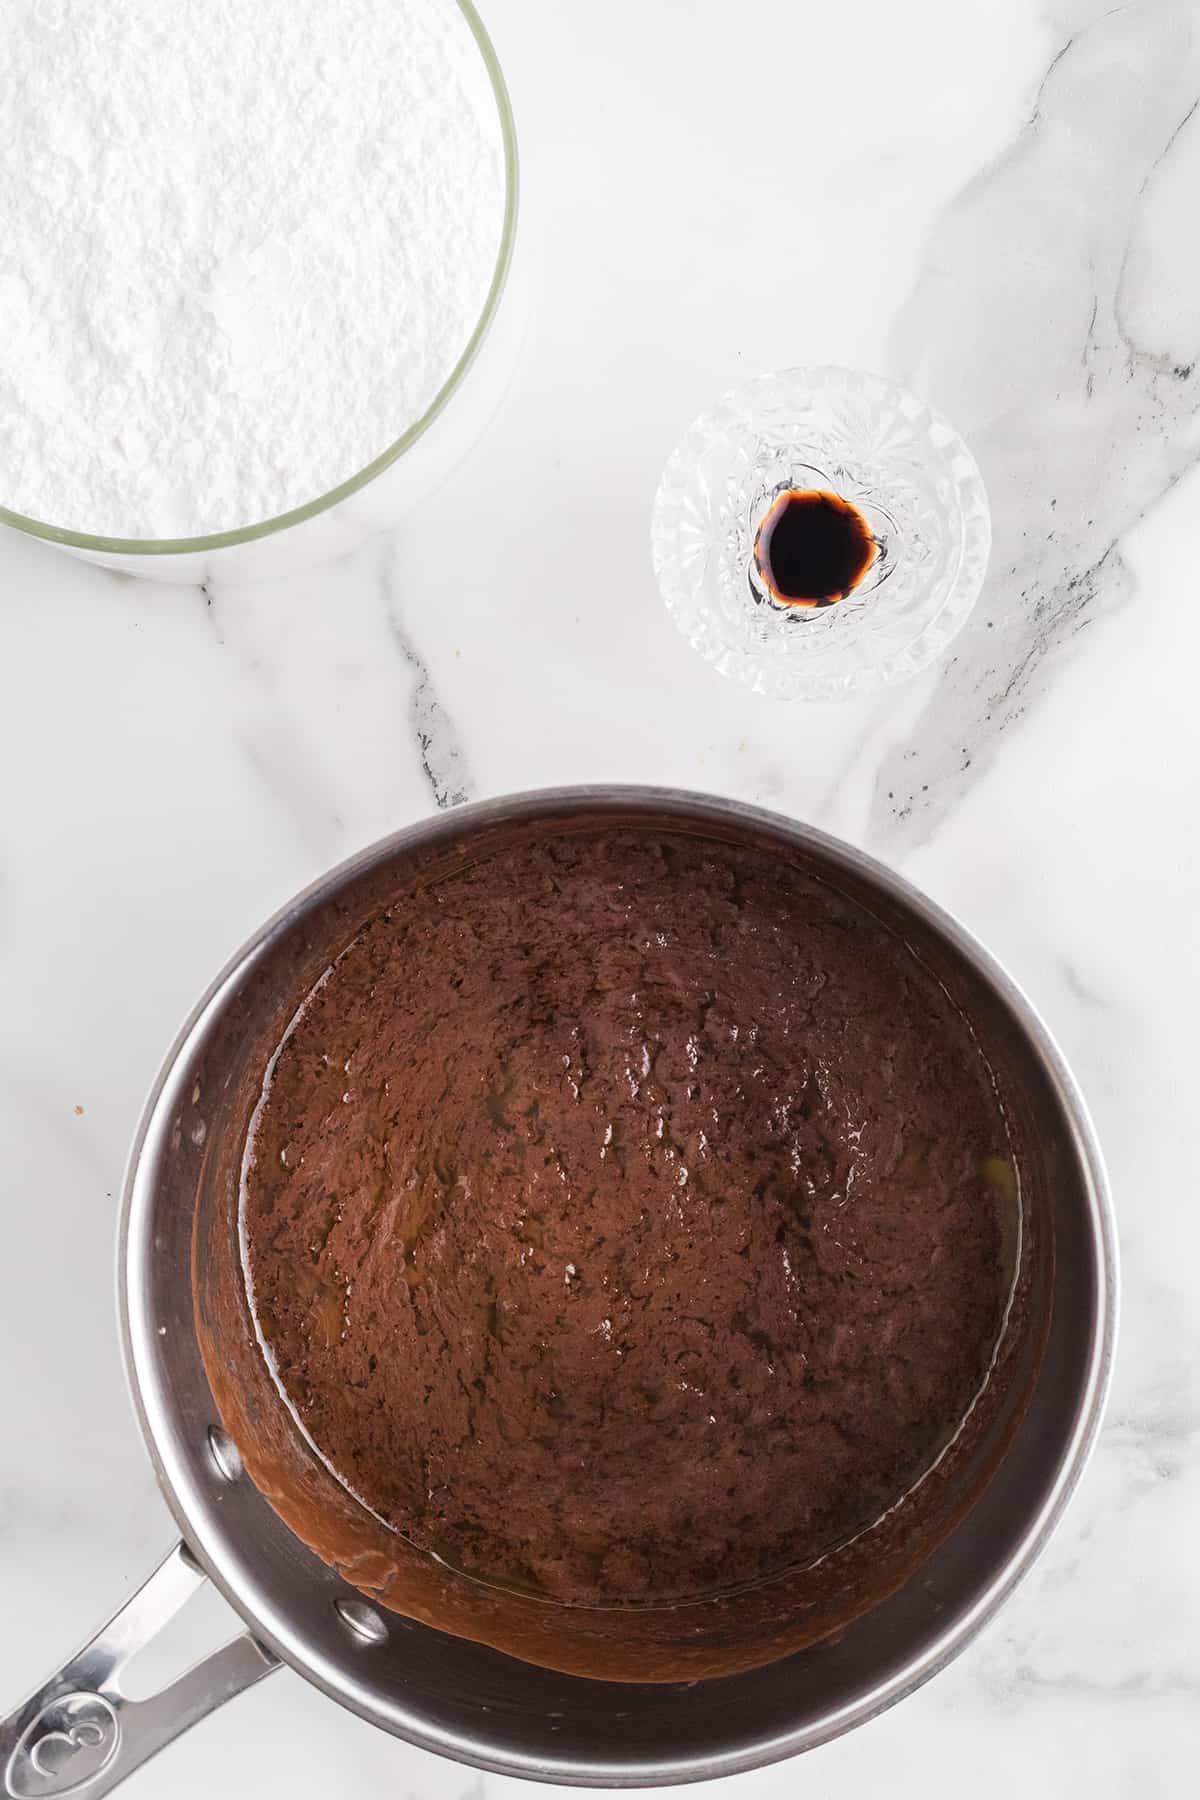 Butter, cocoa, and milk in a saucepan.